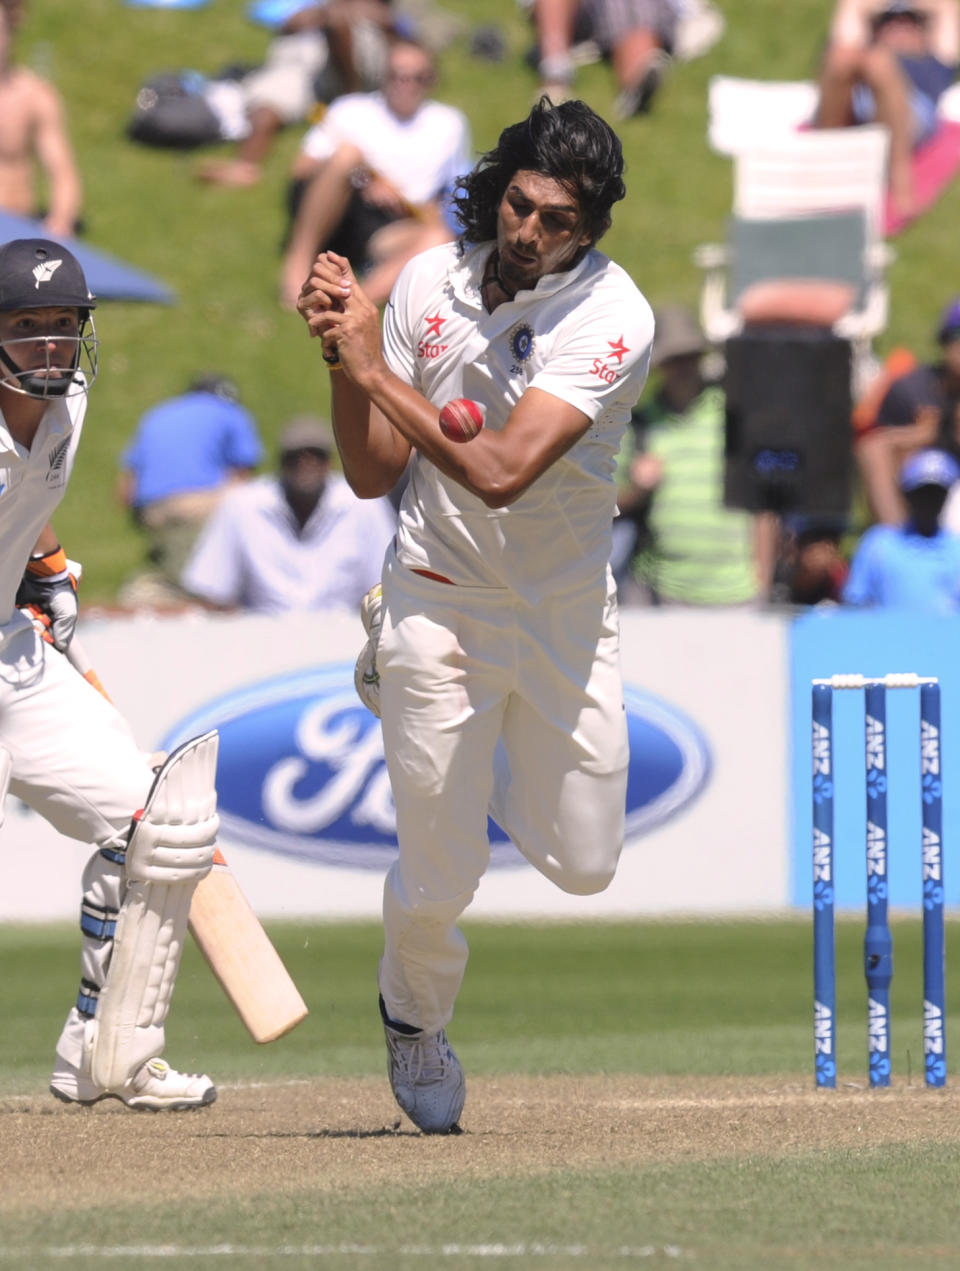 India’s Ishant Sharma attempts a caught and bowled of New Zealand’s Brendon McCullum on the third day of the second cricket test at Basin Reserve in Wellington, New Zealand, Sunday, Feb. 16, 2014. (AP Photo/SNPA, Ross Setford) NEW ZEALAND OUT